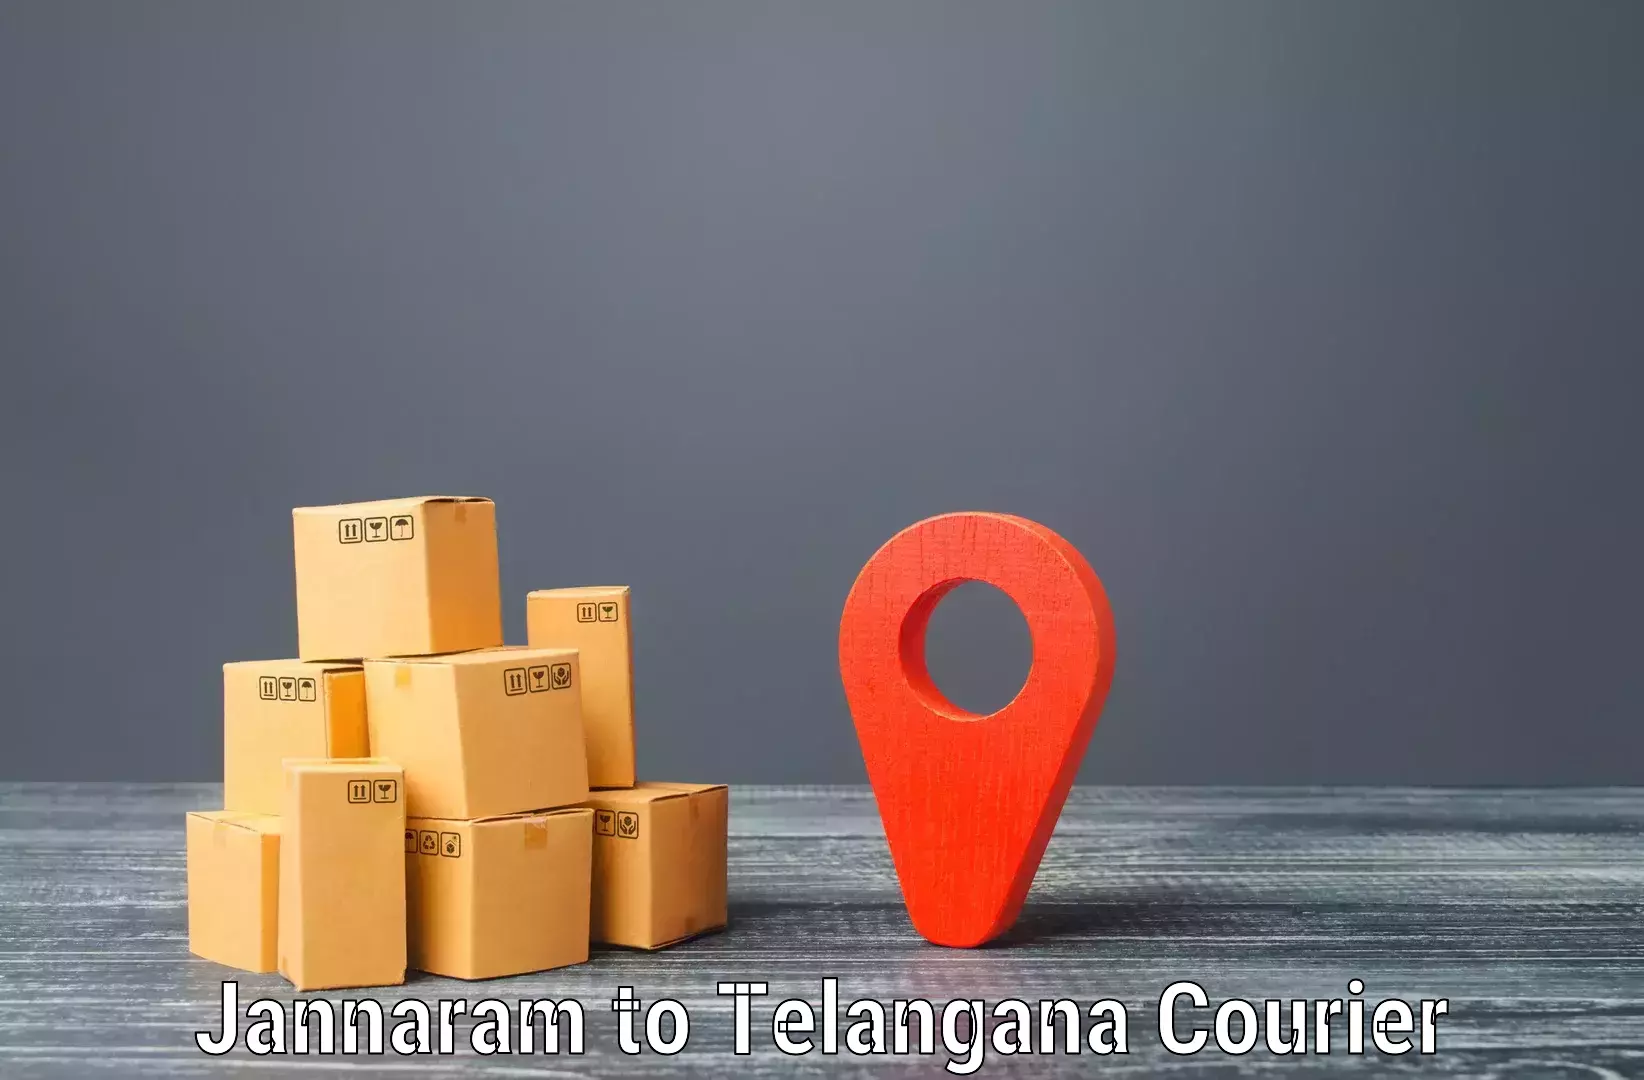 Cargo delivery service Jannaram to Secunderabad